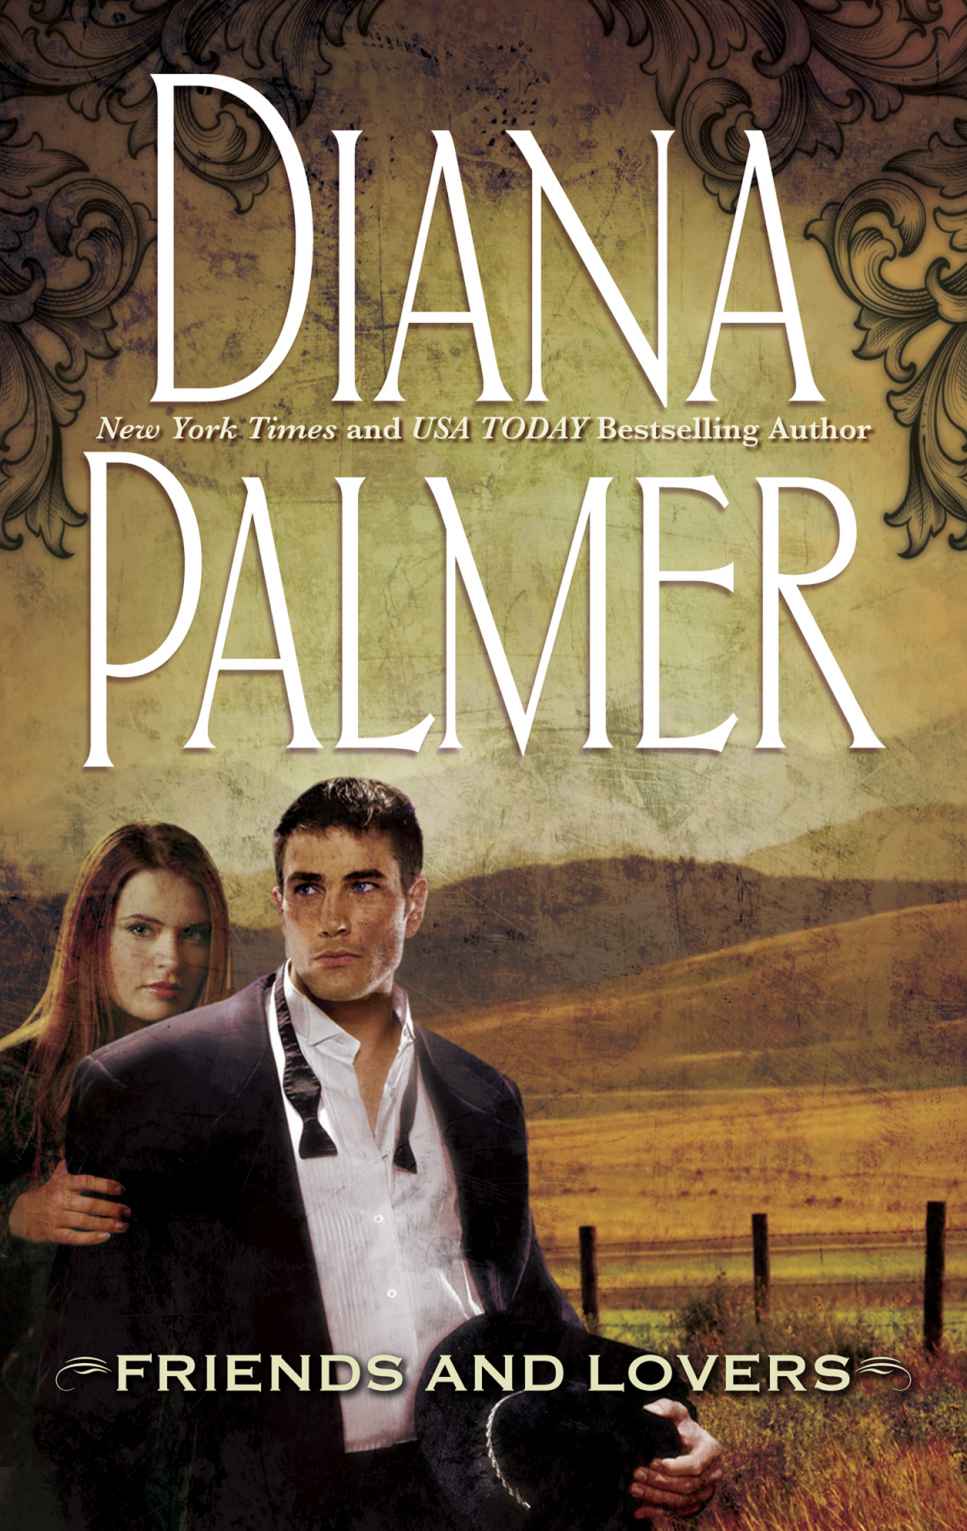 Friends and Lovers by Diana Palmer